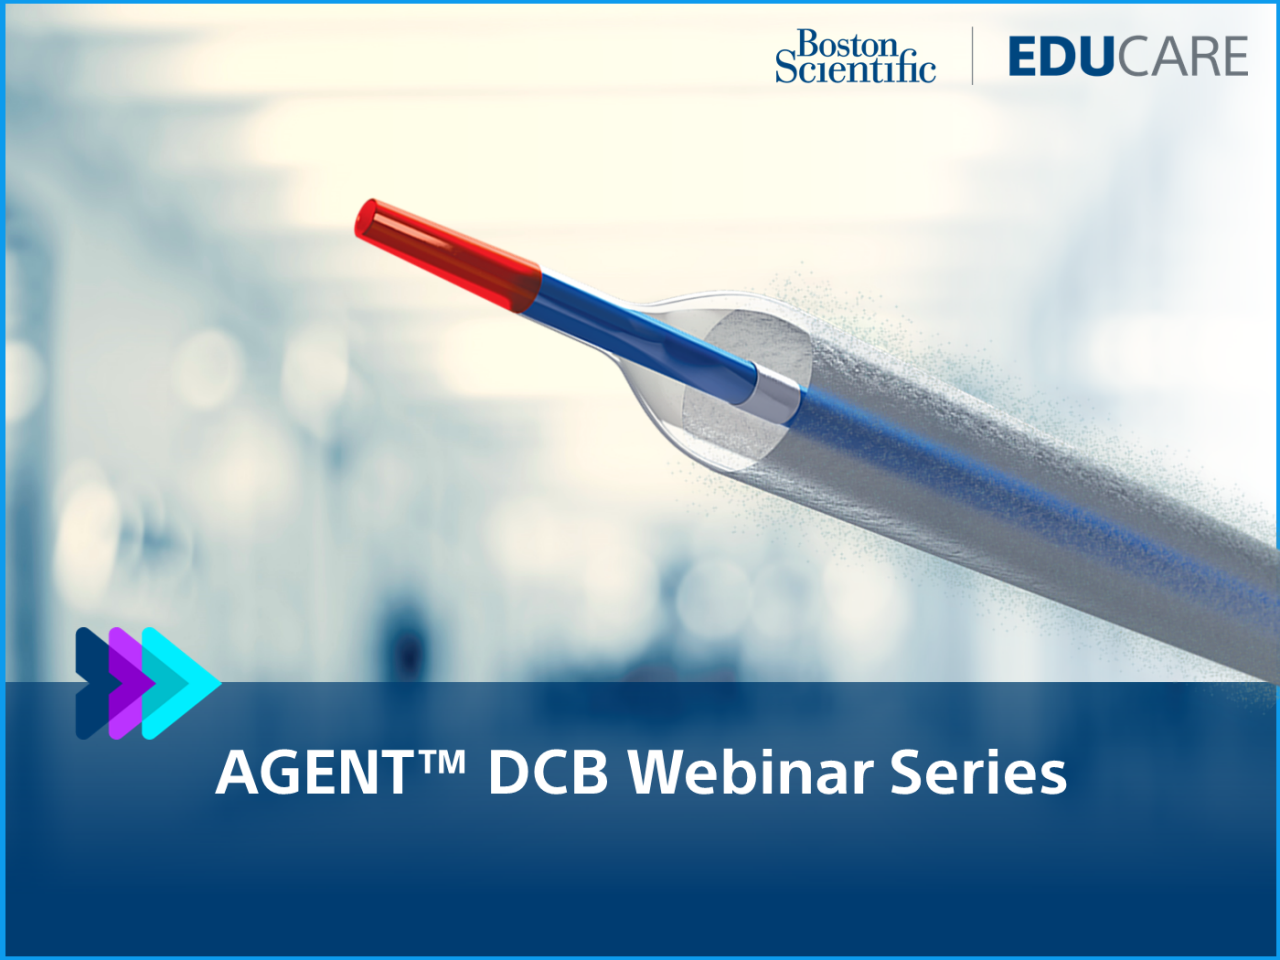 AGENT DCB Webinar Series on EDUCARE features cardiology experts discussing clinical data and optimizing treatment options for ISR patients.